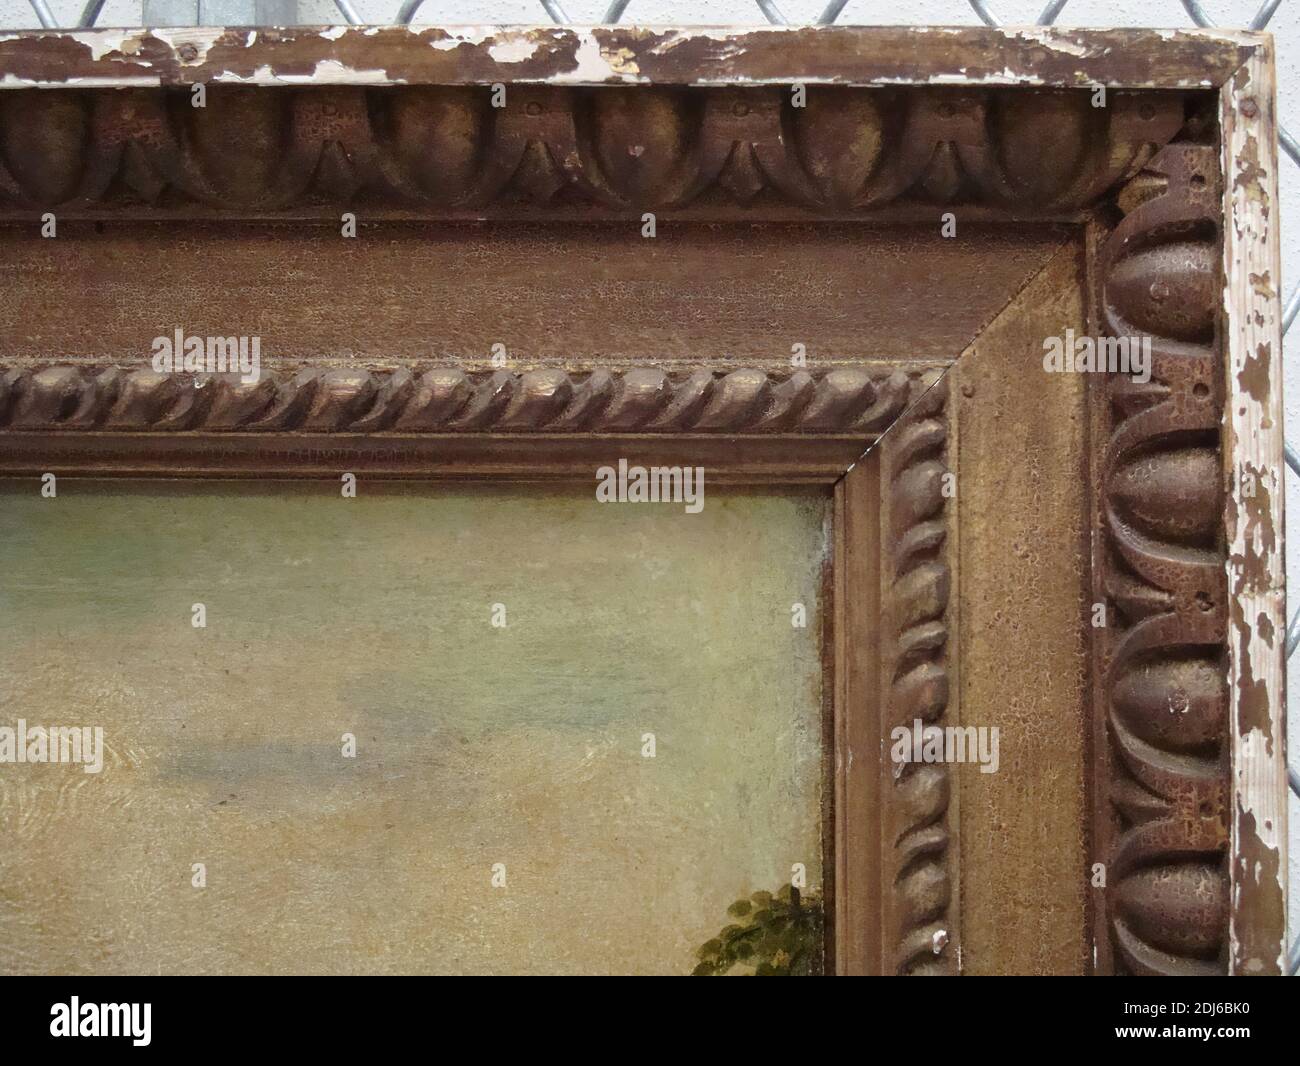 British, Palladian frame, Unknown framemaker, late 18th century, Carved wood, original deteriorated and flaking oil gilding; textured frieze, Frame: 50 × 62 × 3 inches (127 × 157.5 × 7.6 cm Stock Photo